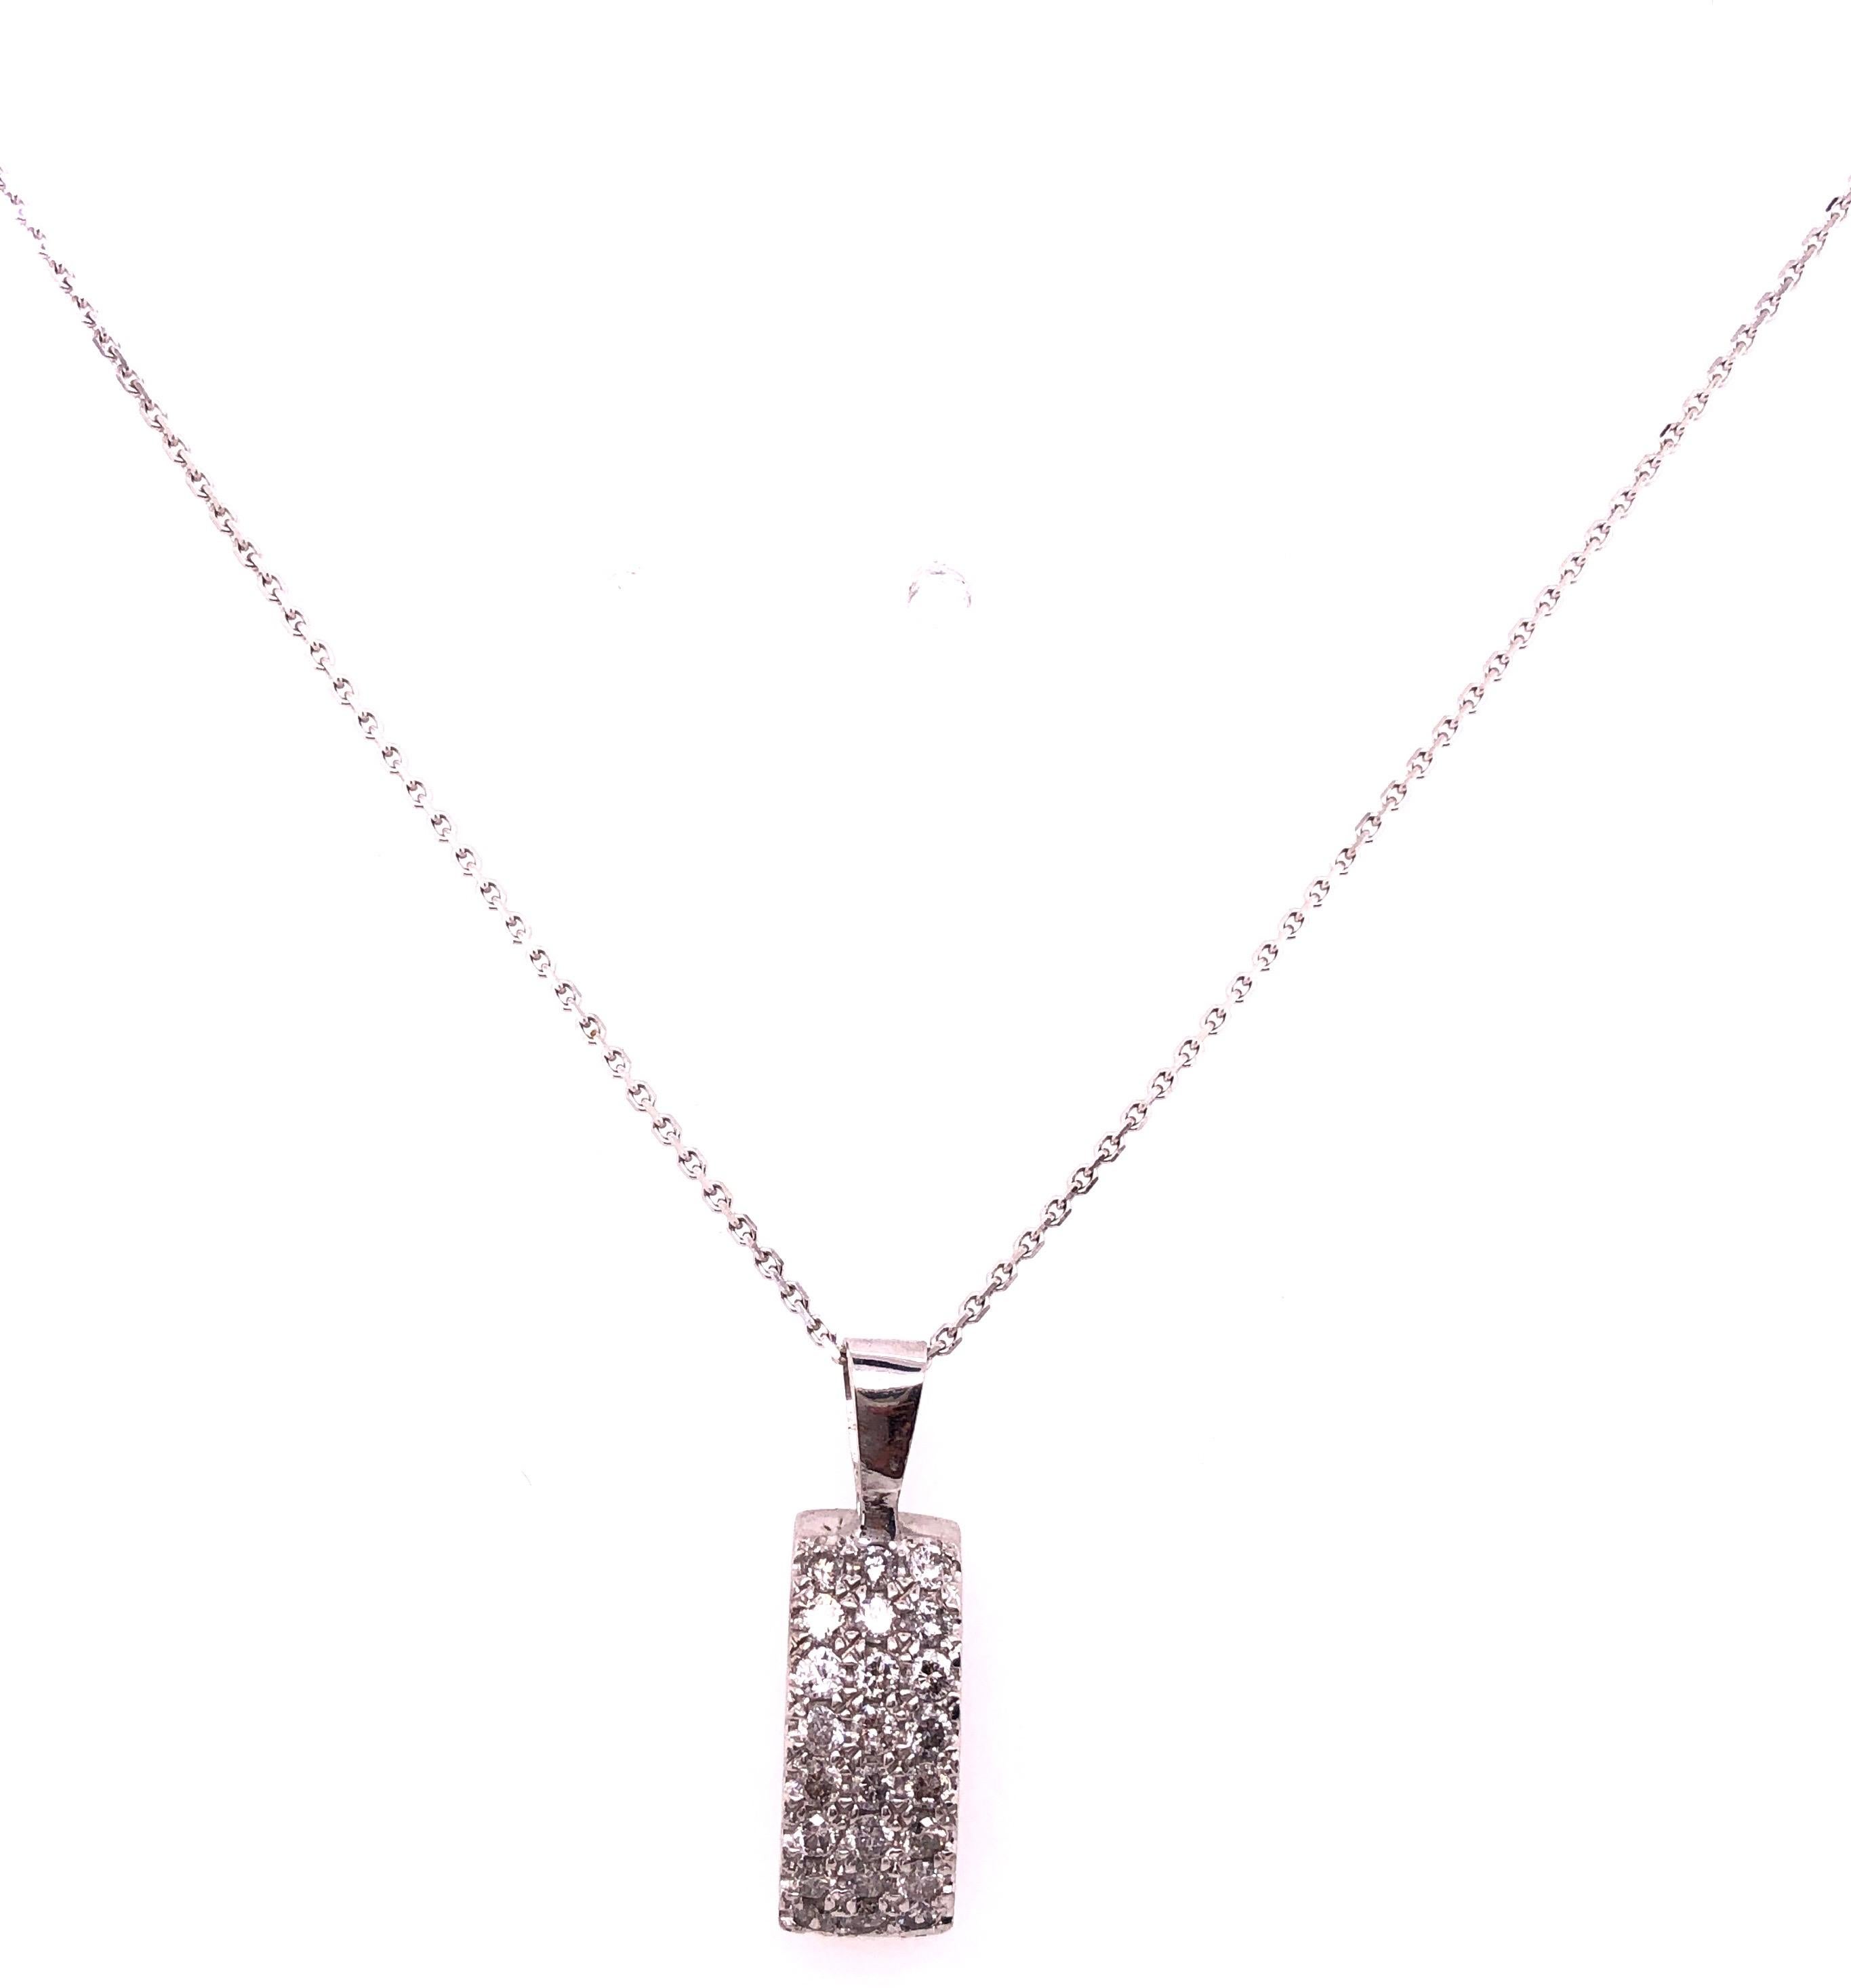 14Kt White Gold 16 inches Necklace with Pendant 0.80ct Total Diamond Weight having 24 stones. 
3.3 grams total weight